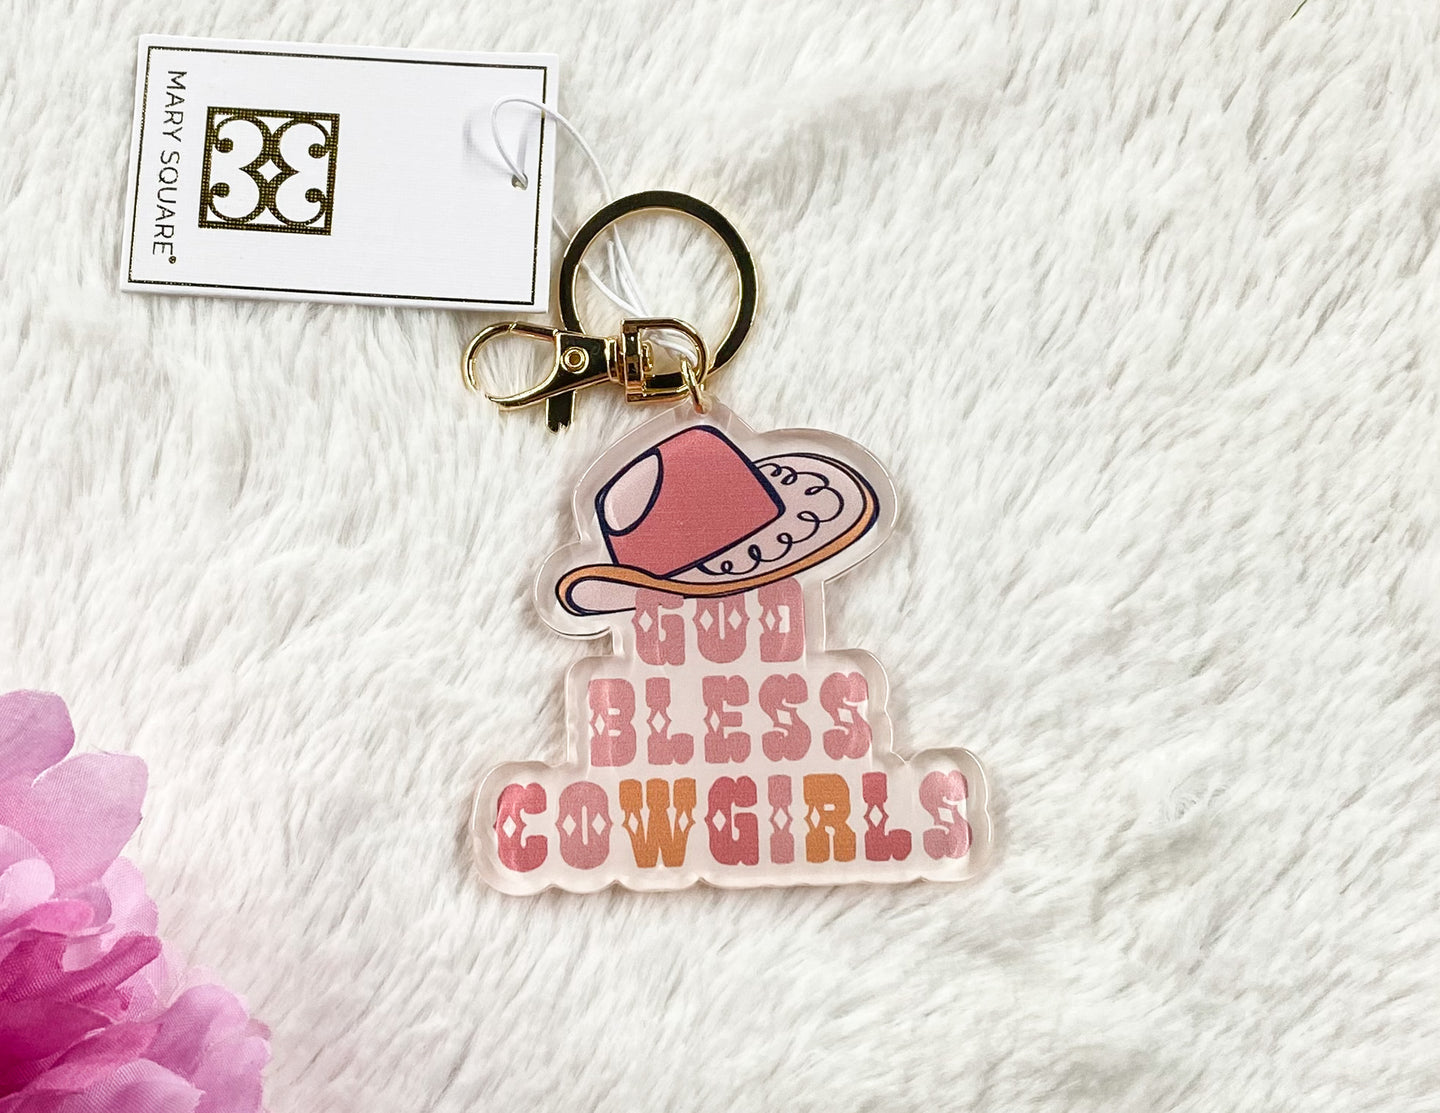 Mary Square Acrylic Keychains God Bless Cowgirls